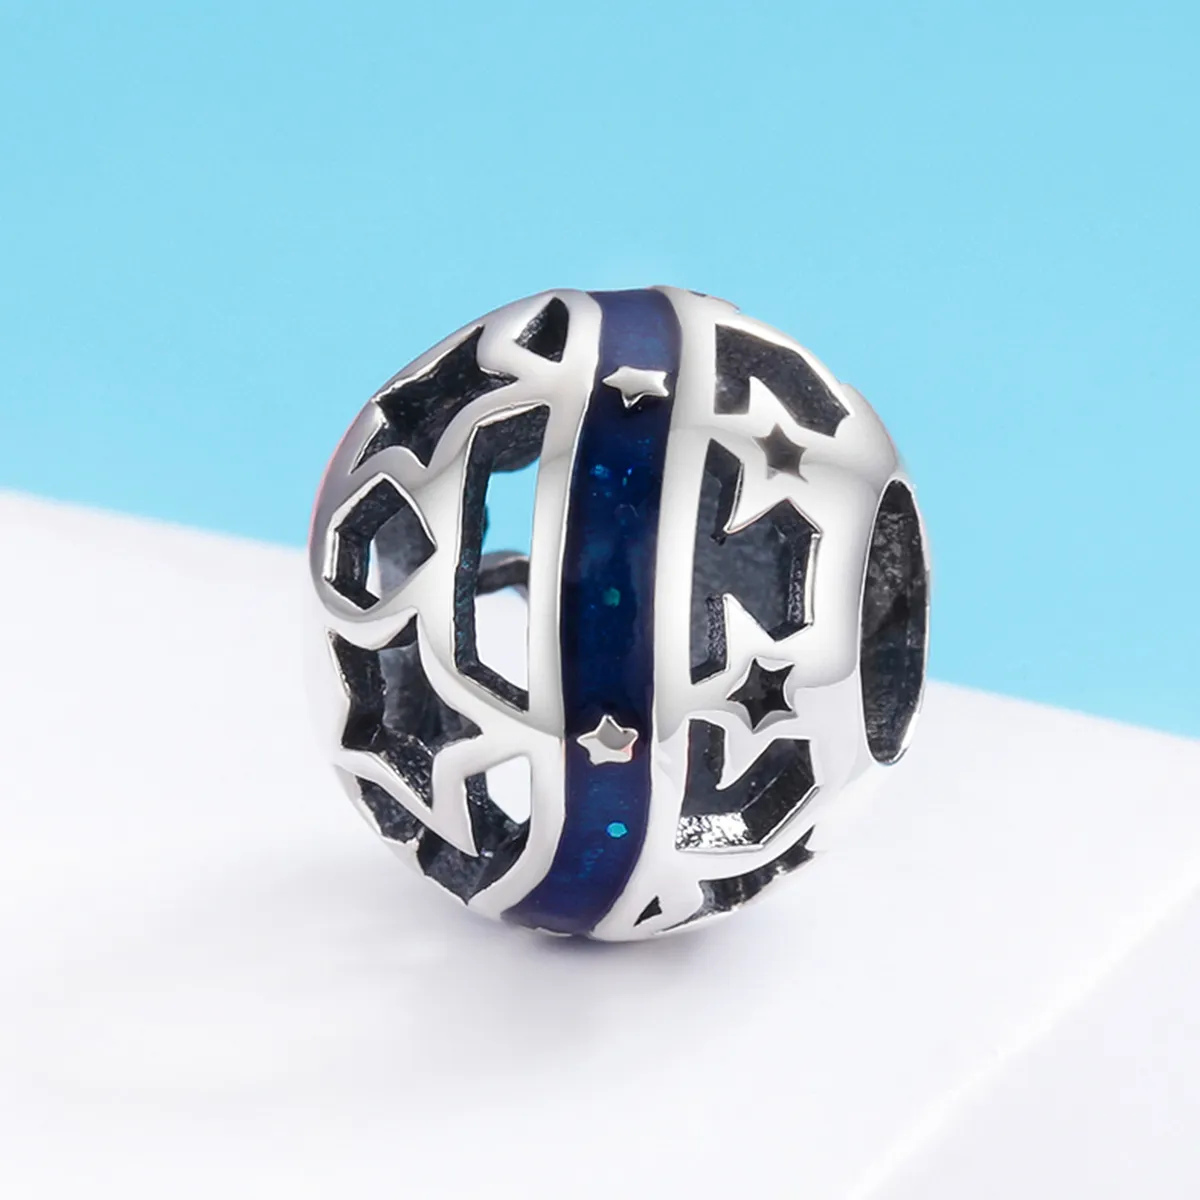 Pandora Style Silver The Shining Star River Charm - SCC640